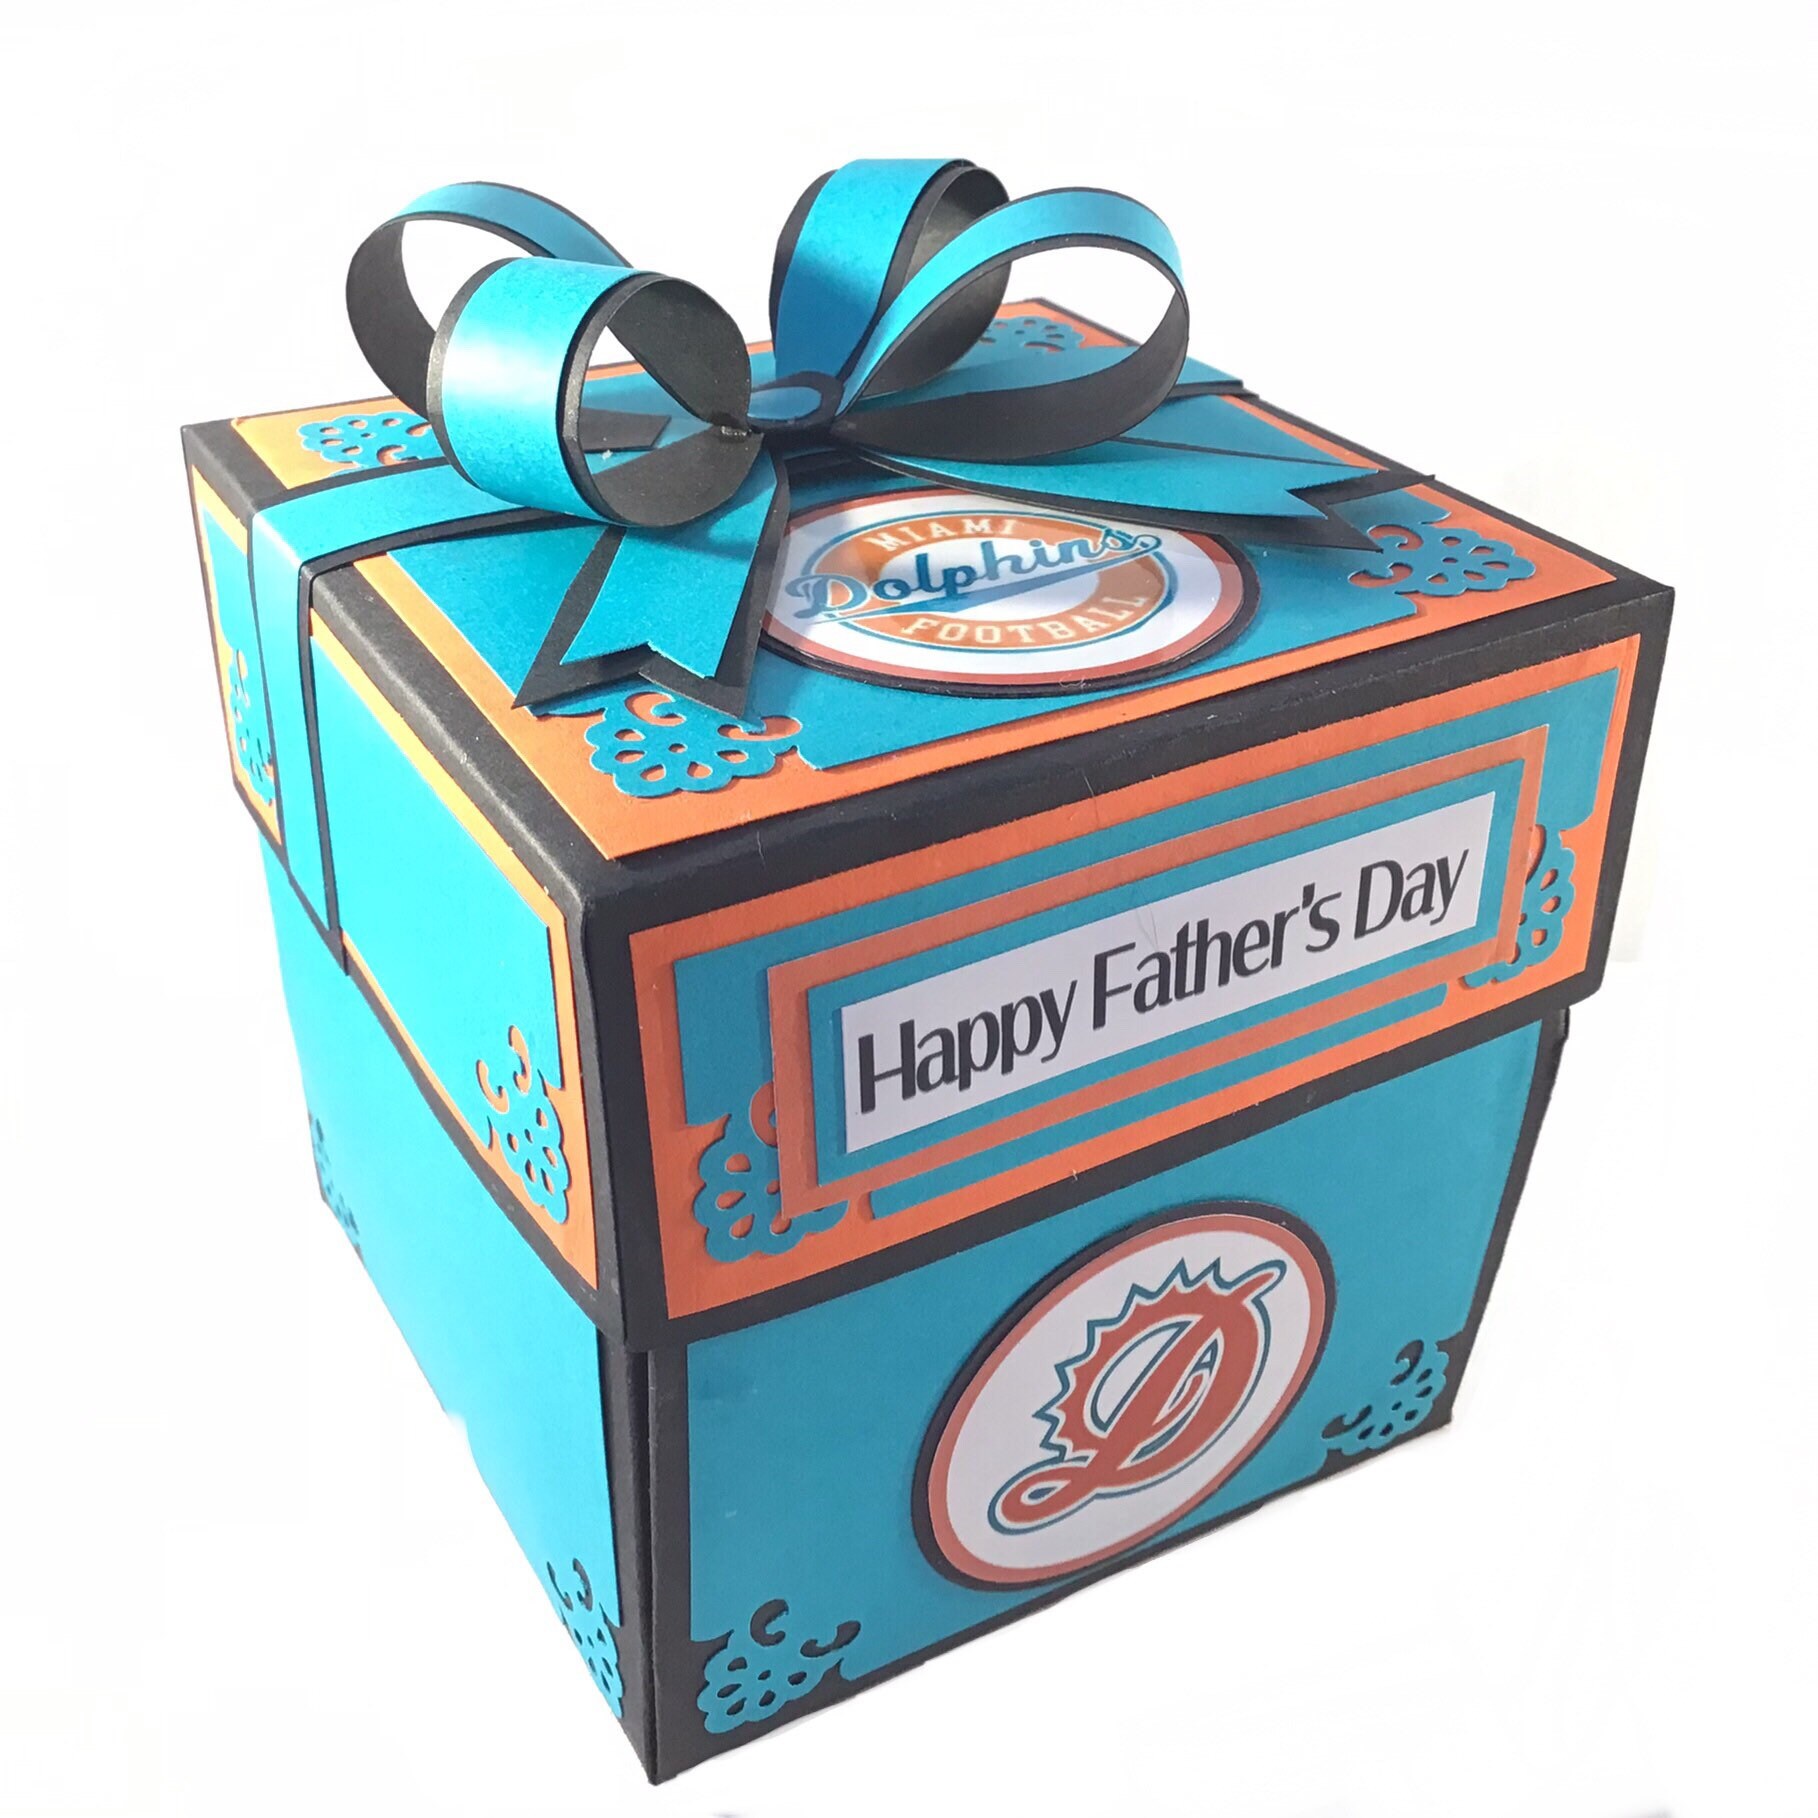 Customised Explosion Box, Father's Day 2021